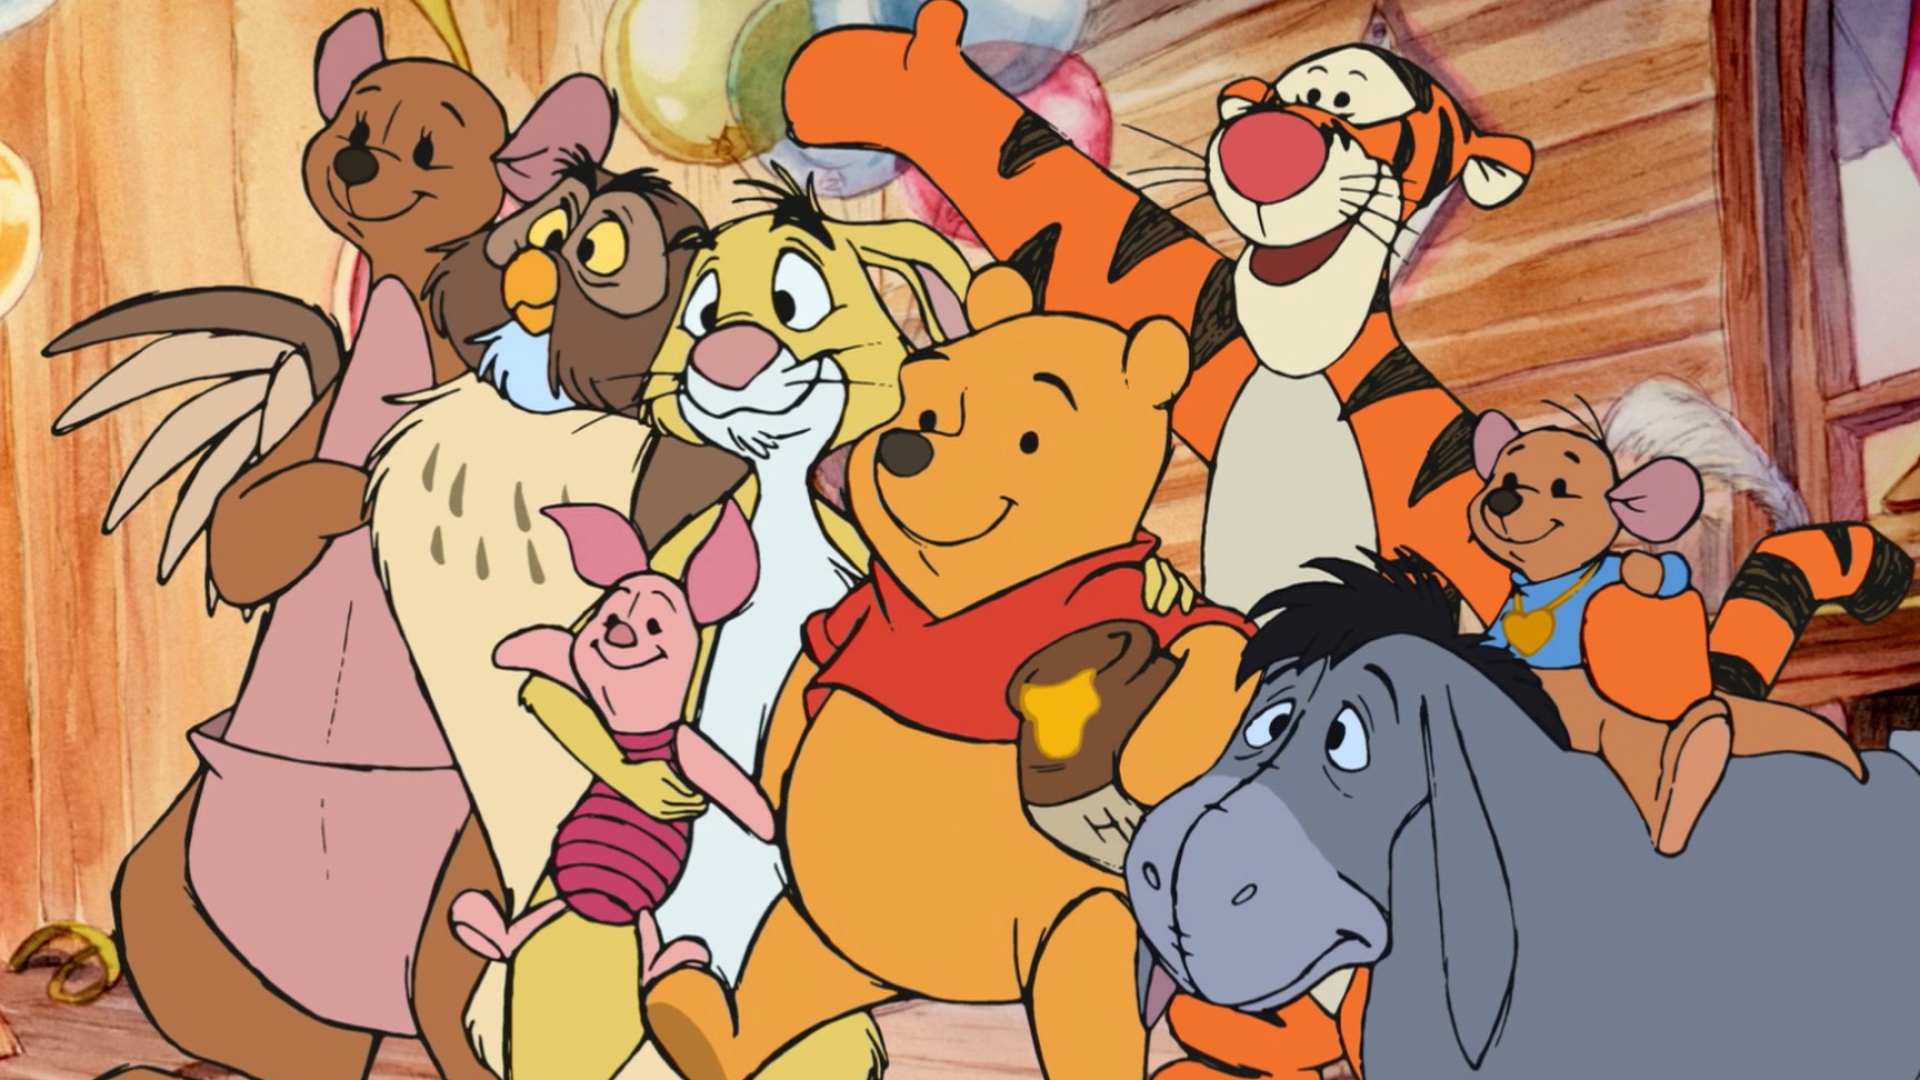 Tigger, Winnie-the-Pooh animation, Tigger Movie, Winnie the Pooh pictures, 1920x1080 Full HD Desktop